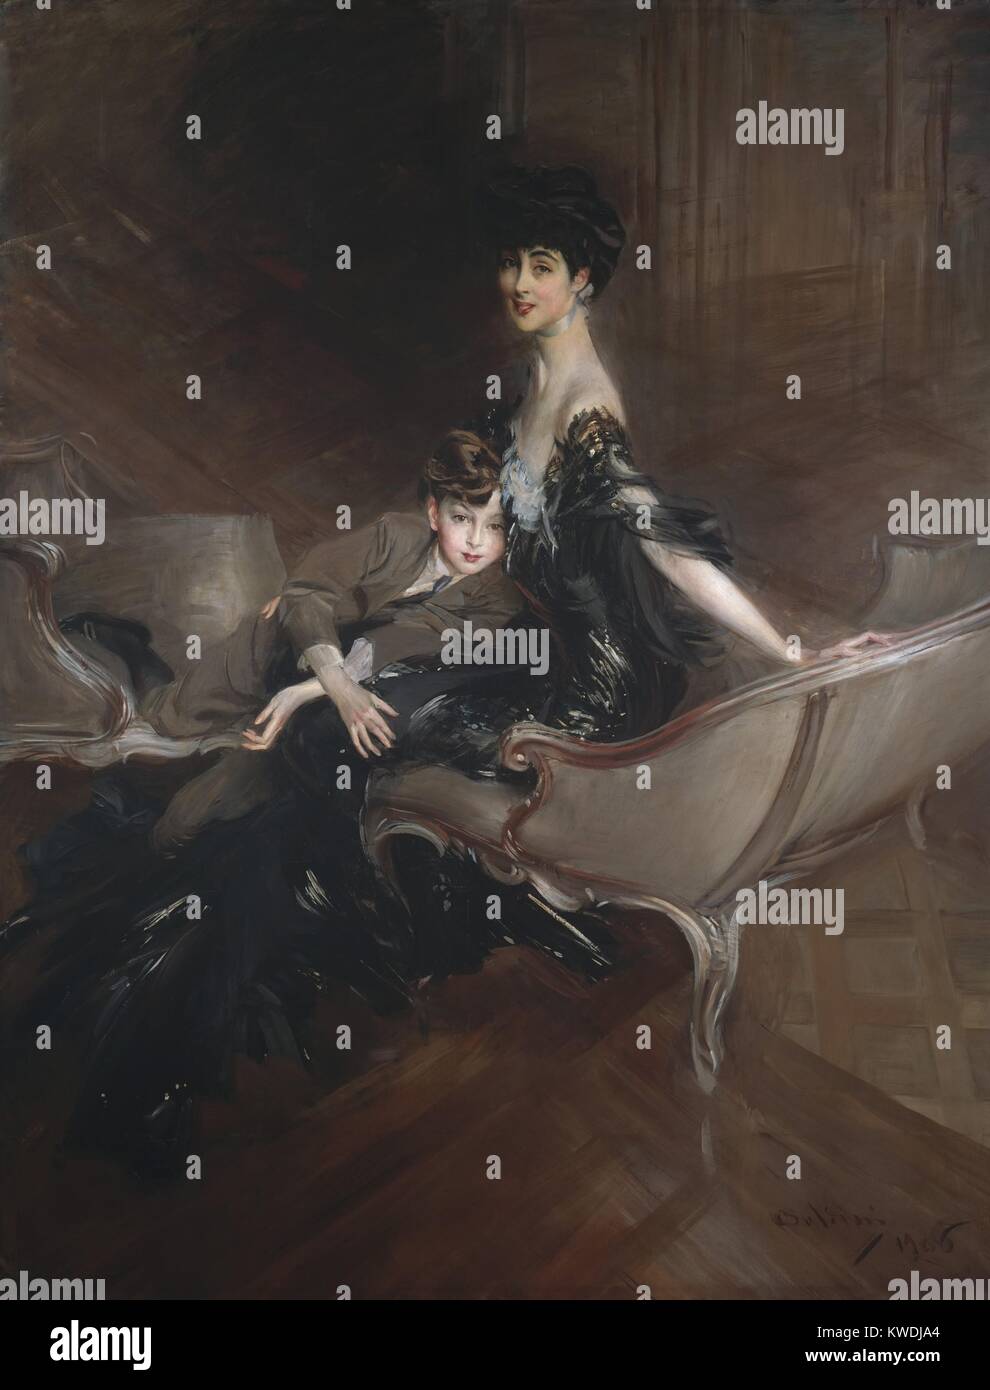 CONSUELO VANDERBILT, DUCHESS OF MARLBOROUGH, by Giovanni Boldini, 1906, Italian oil painting. Italian born Boldini painted the portrait of the Duchess and her son, Lord Ivor Spencer-Churchill, with his painterly facility and flair (BSLOC 2017 10 102) Stock Photo